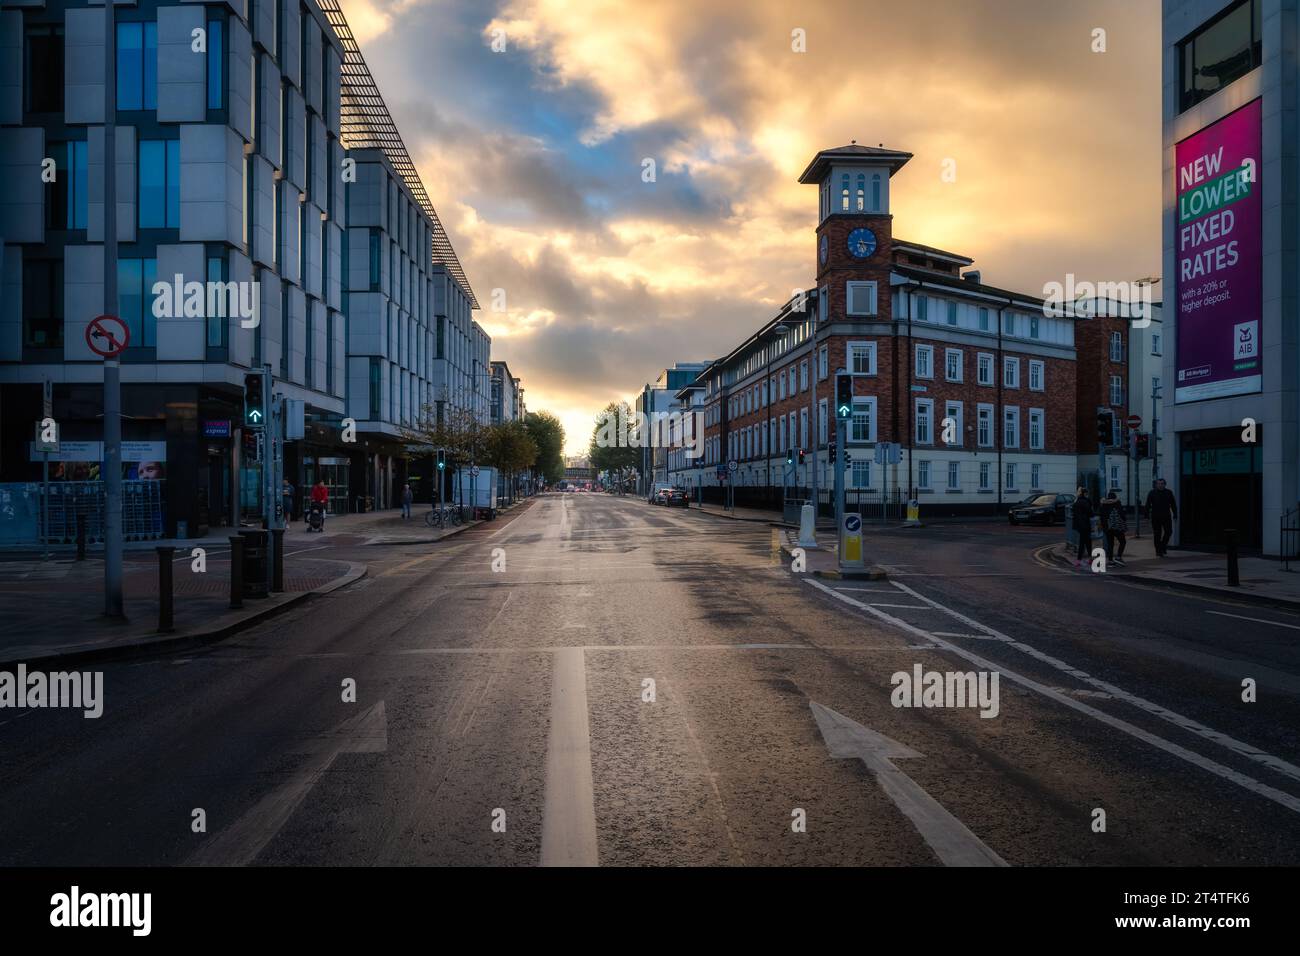 Dublin, Ireland, 10 Oct 2020 Dramatic and moody sunset at Pearse St with mixture of modern and traditional buildings, shops and restaurants Stock Photo